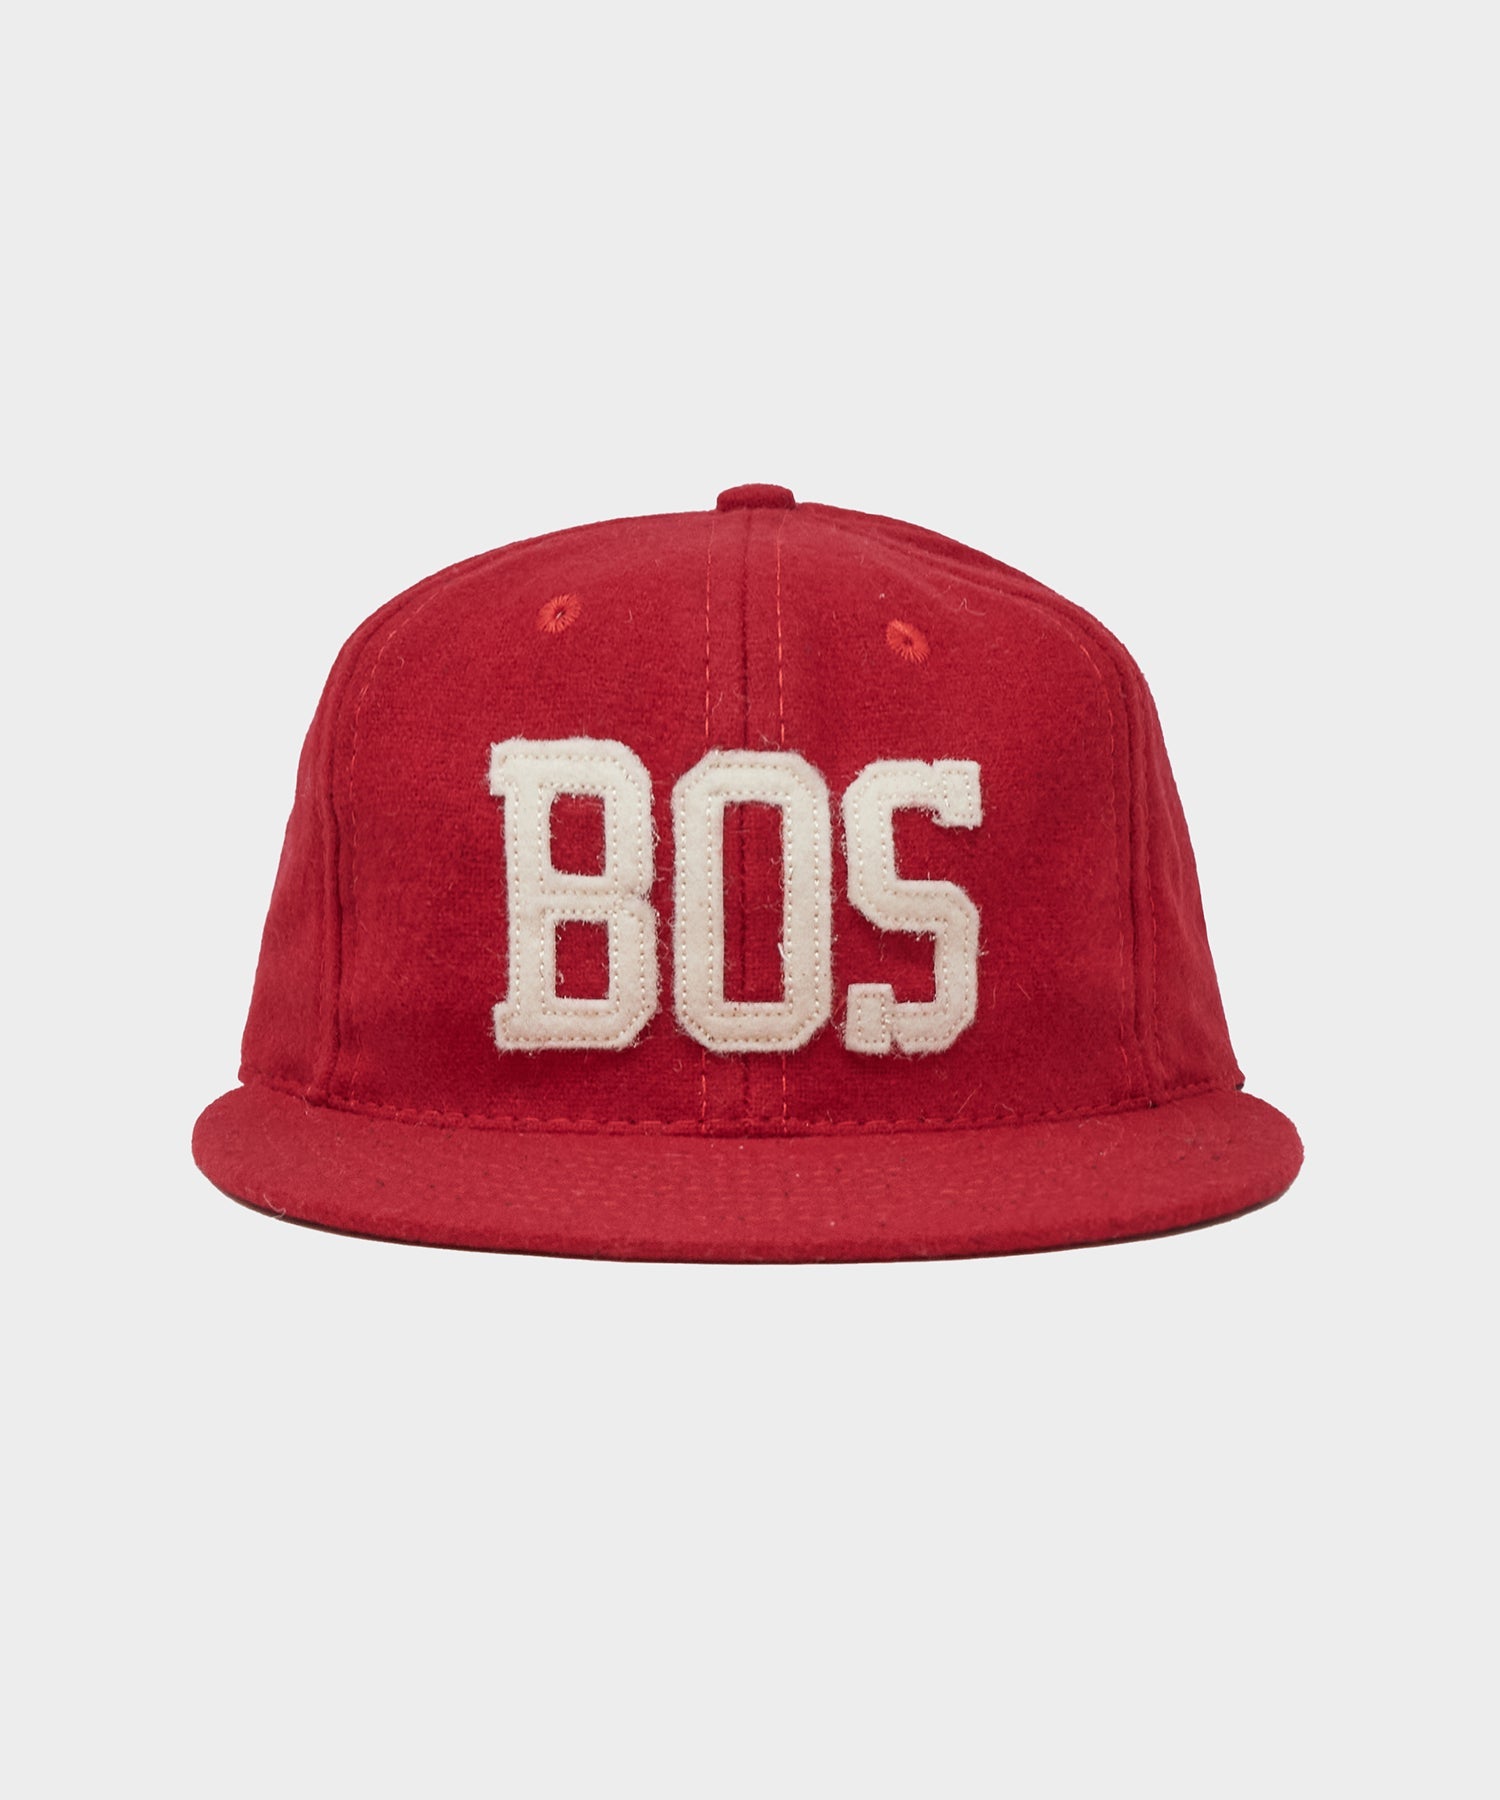 Exclusive Ebbets Boston Cap In Red